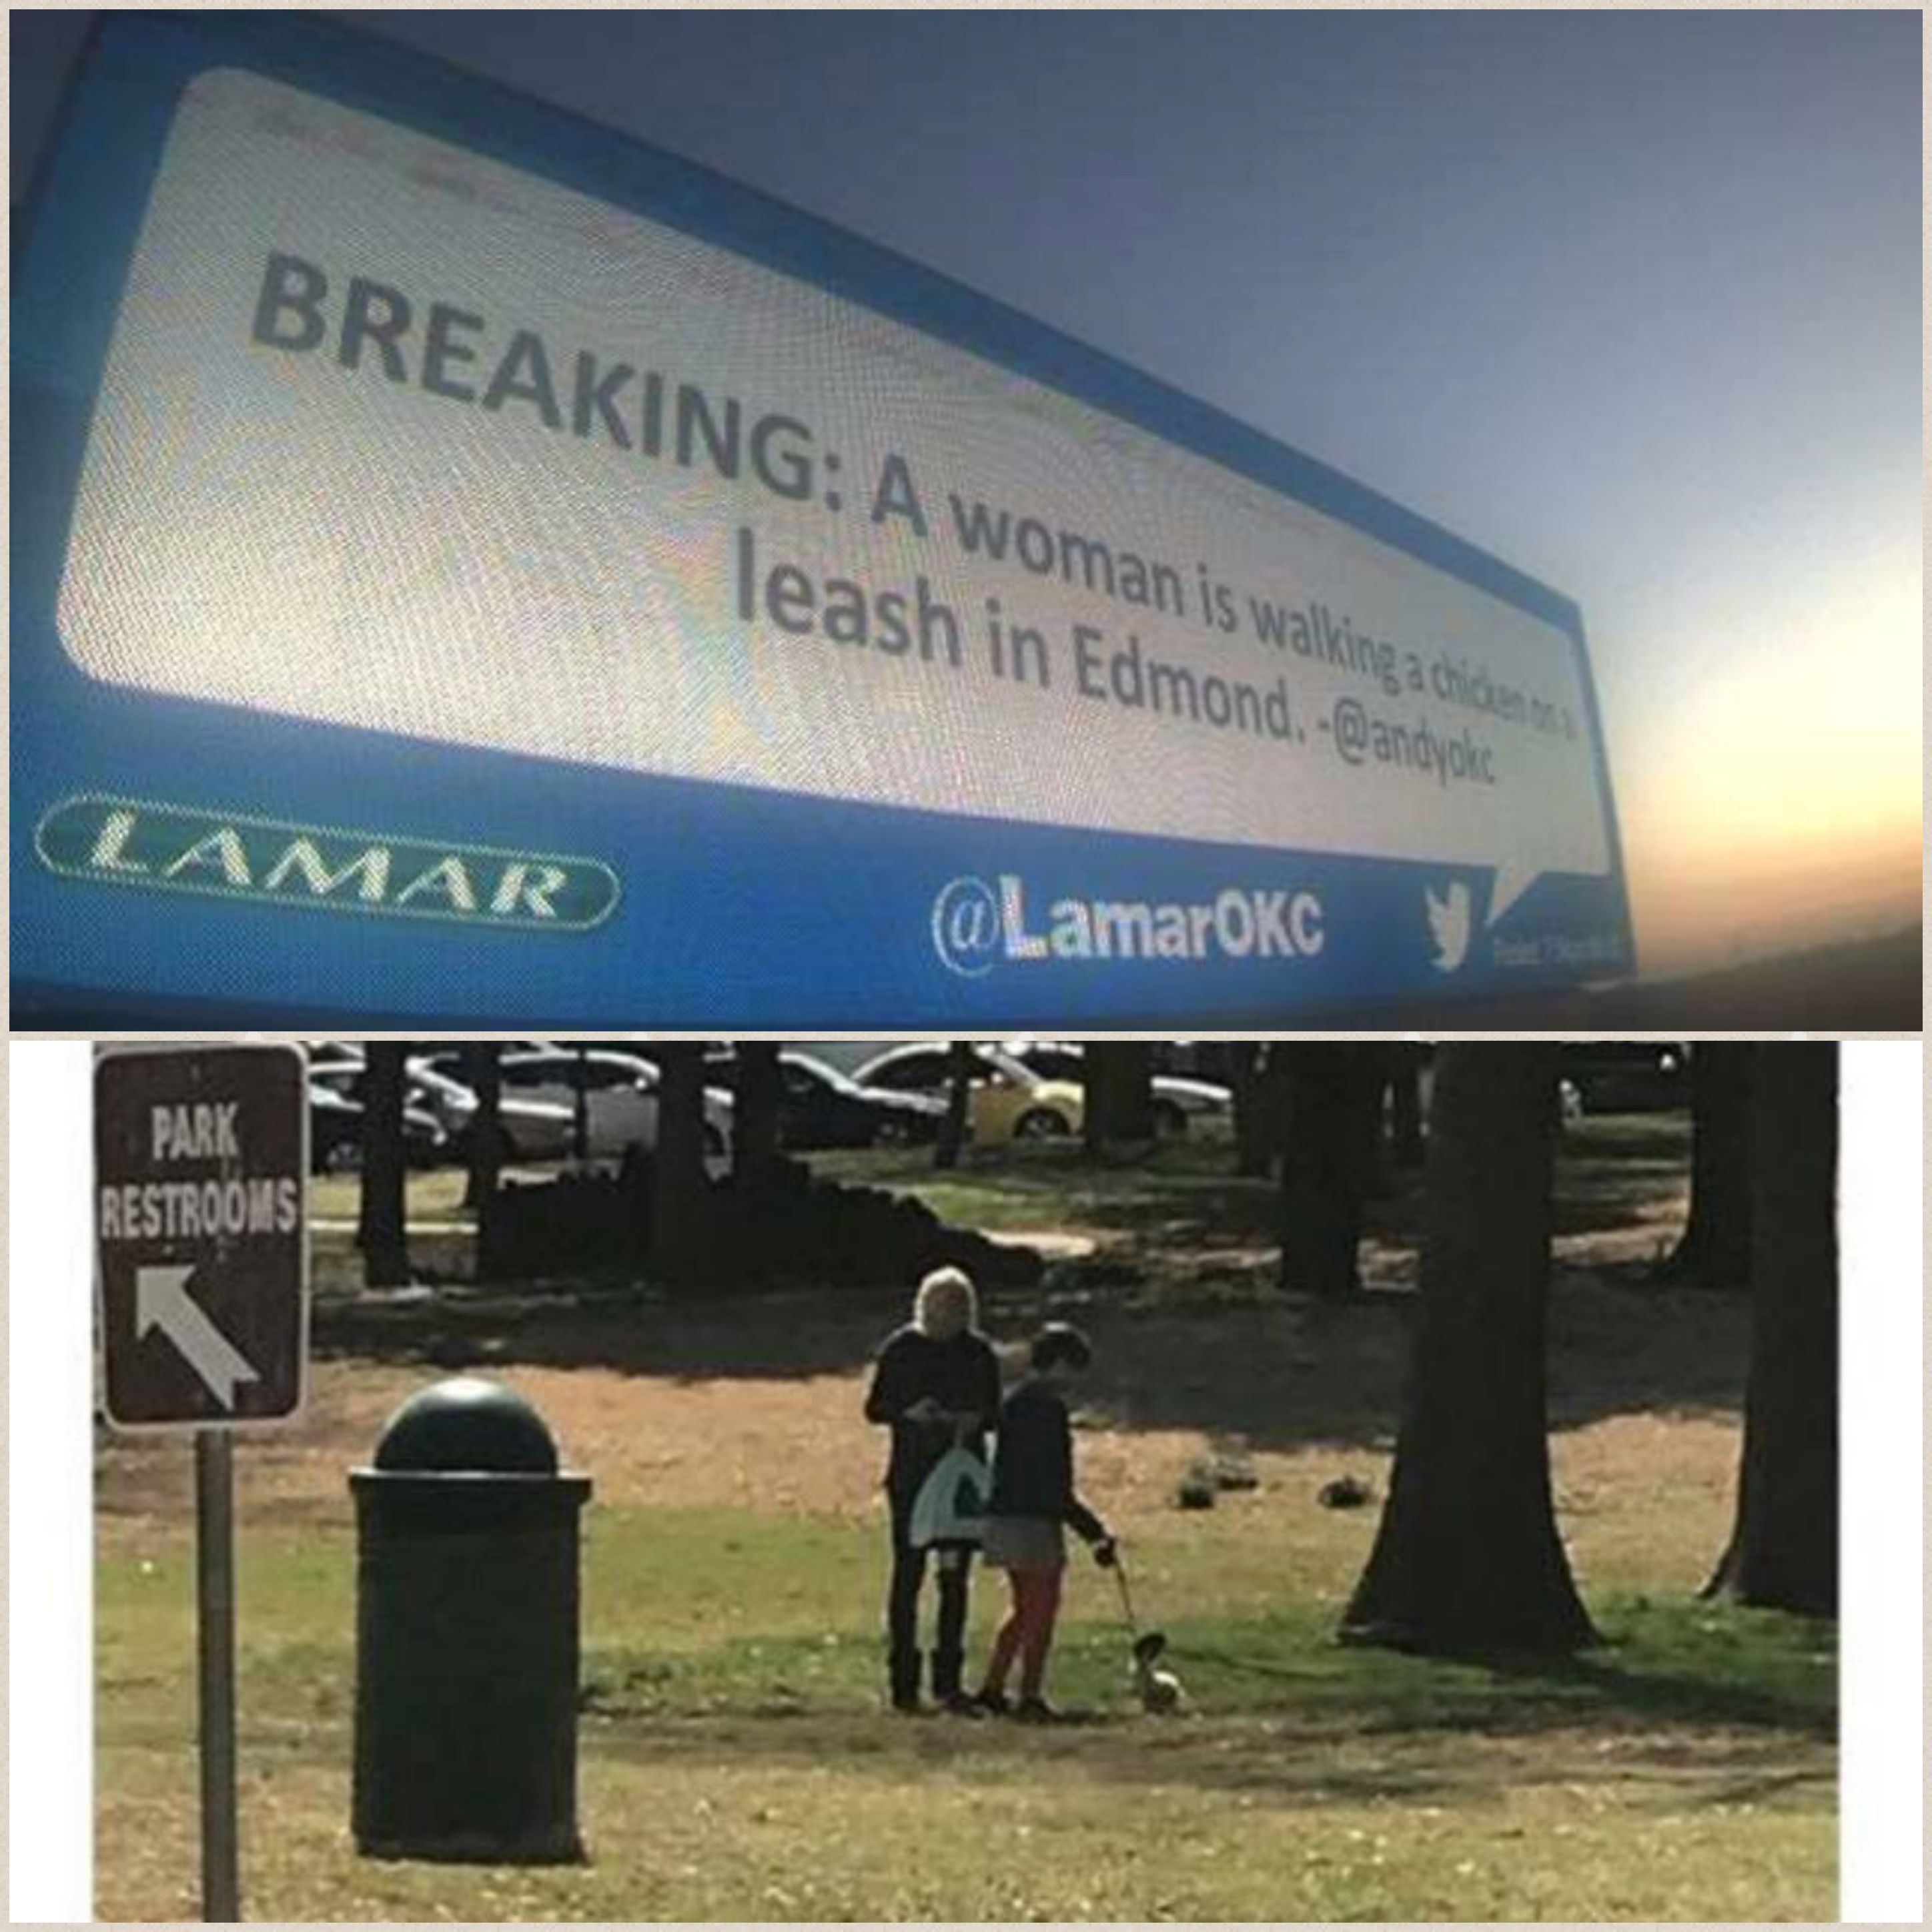 So my daughter bought a leash for her chicken and took it for a walk in the park. Someone took notice and tweeted it to this billboard